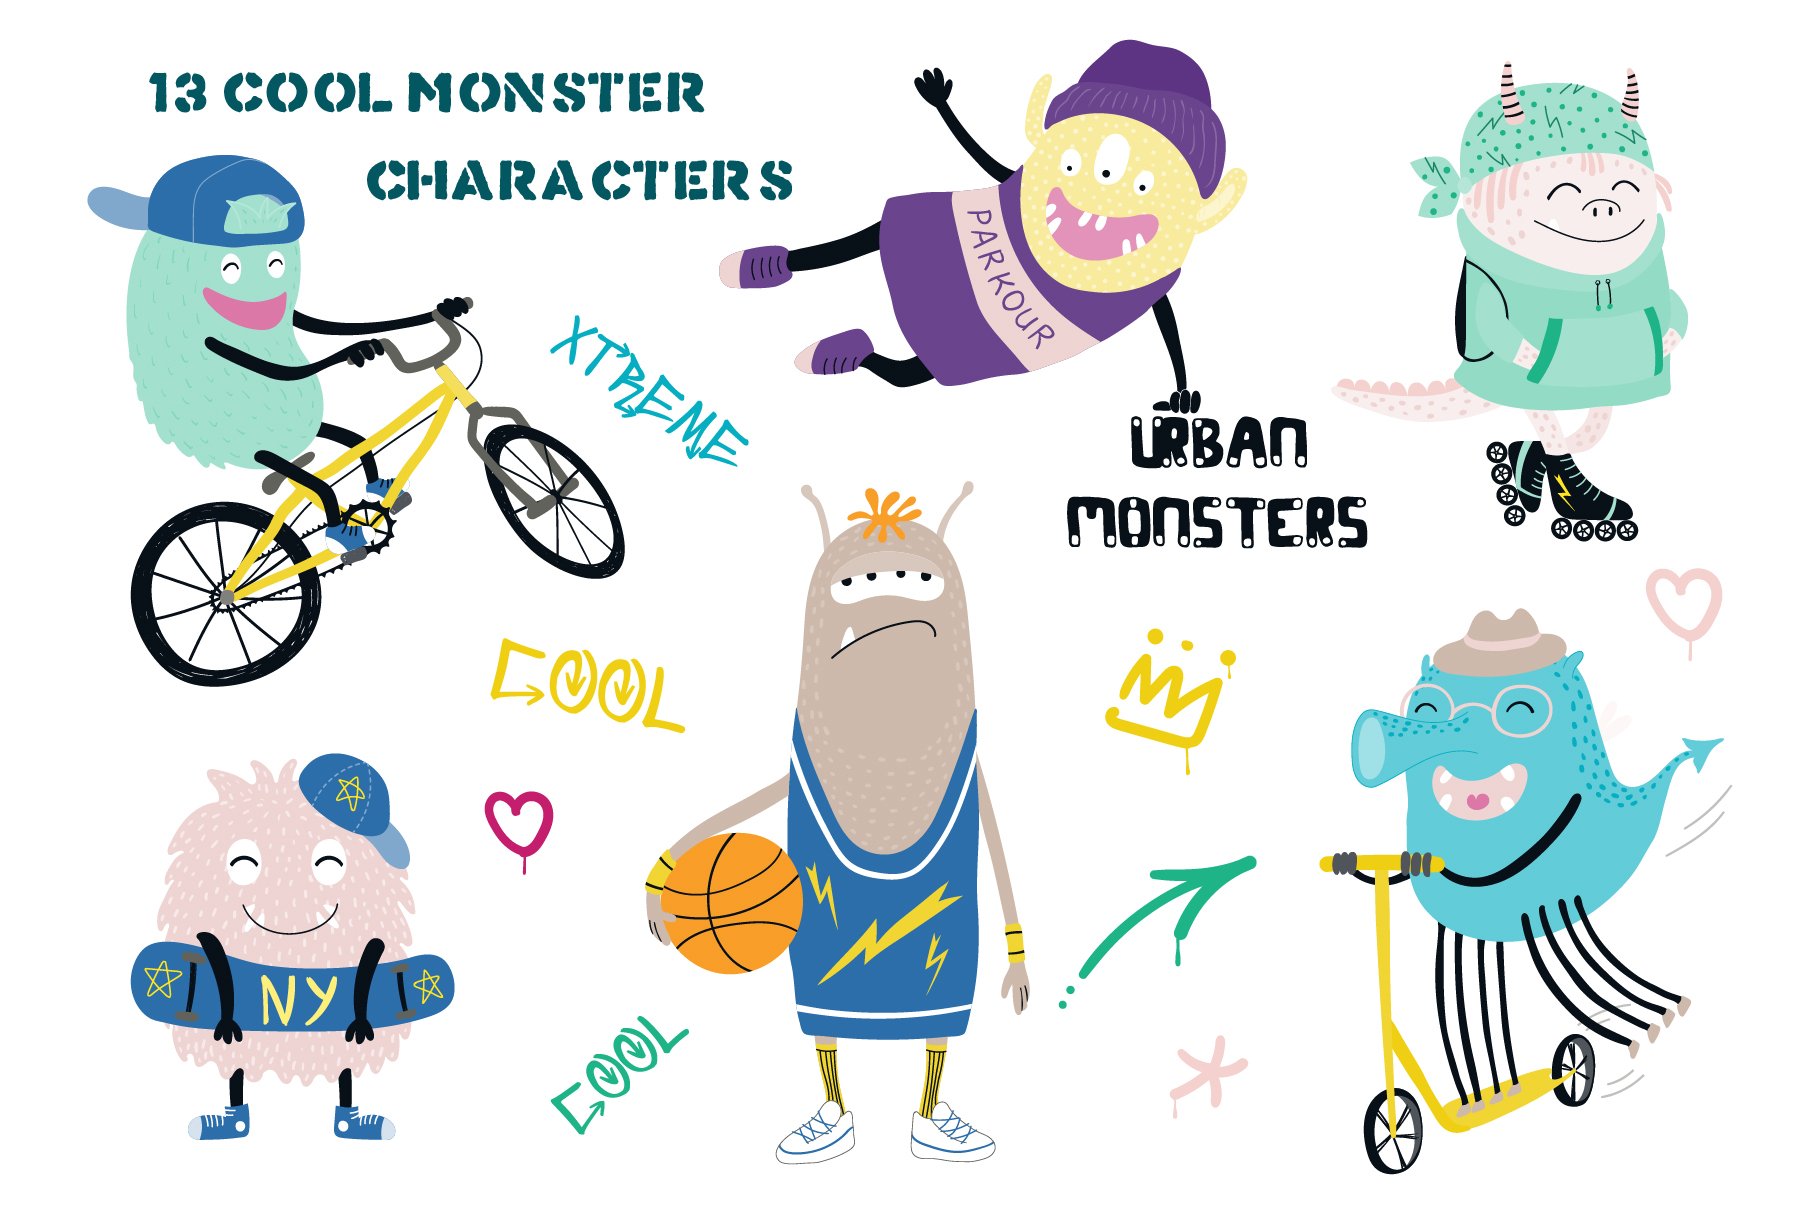 Cool monster characters.